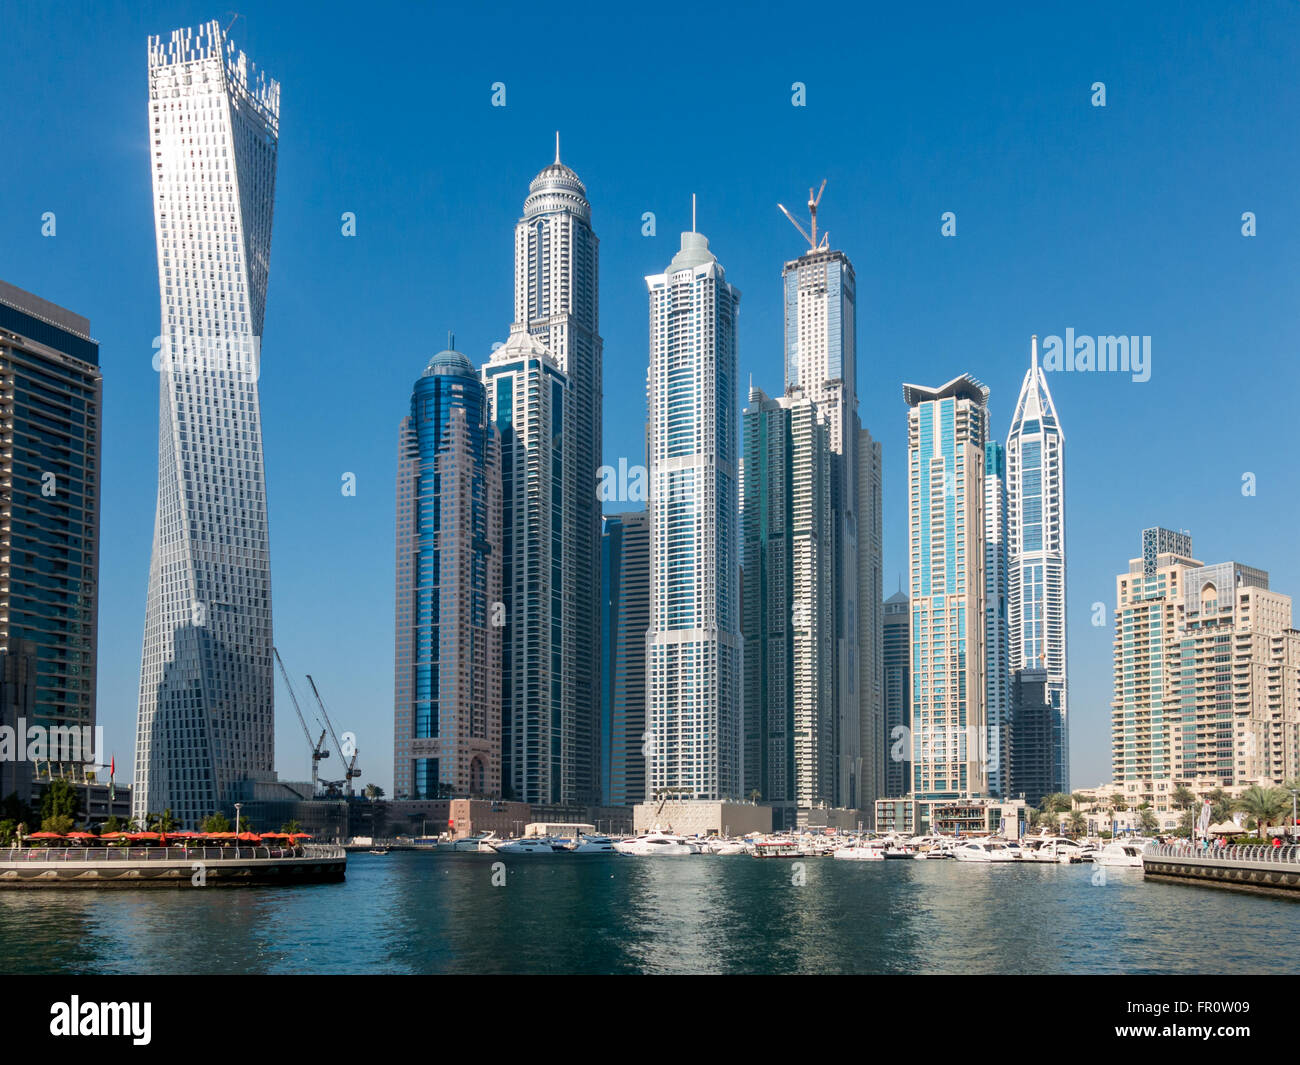 Boats and highrise waterfront buildings in the Marina district of Dubai, United Arab Emirates Stock Photo